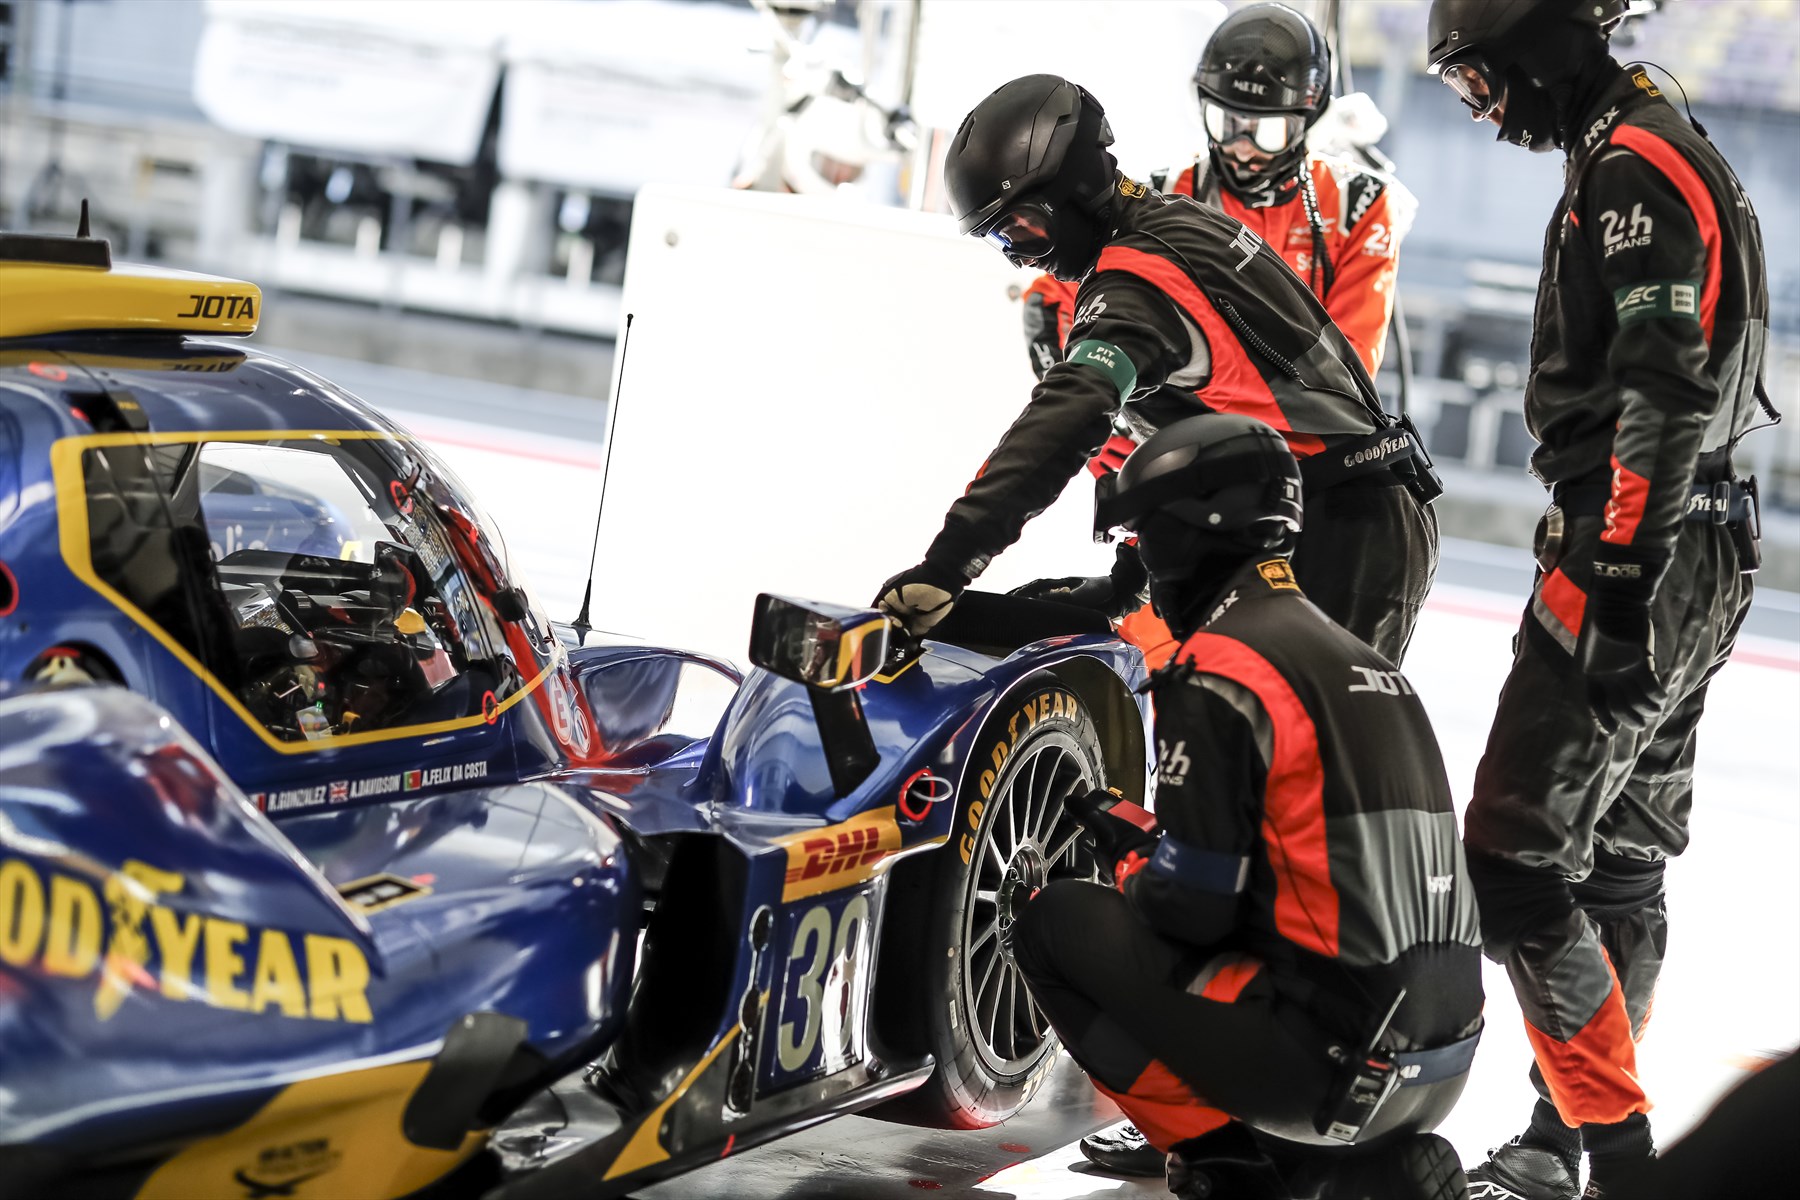 2019-20 WEC preview: World Endurance Championship looks to promote